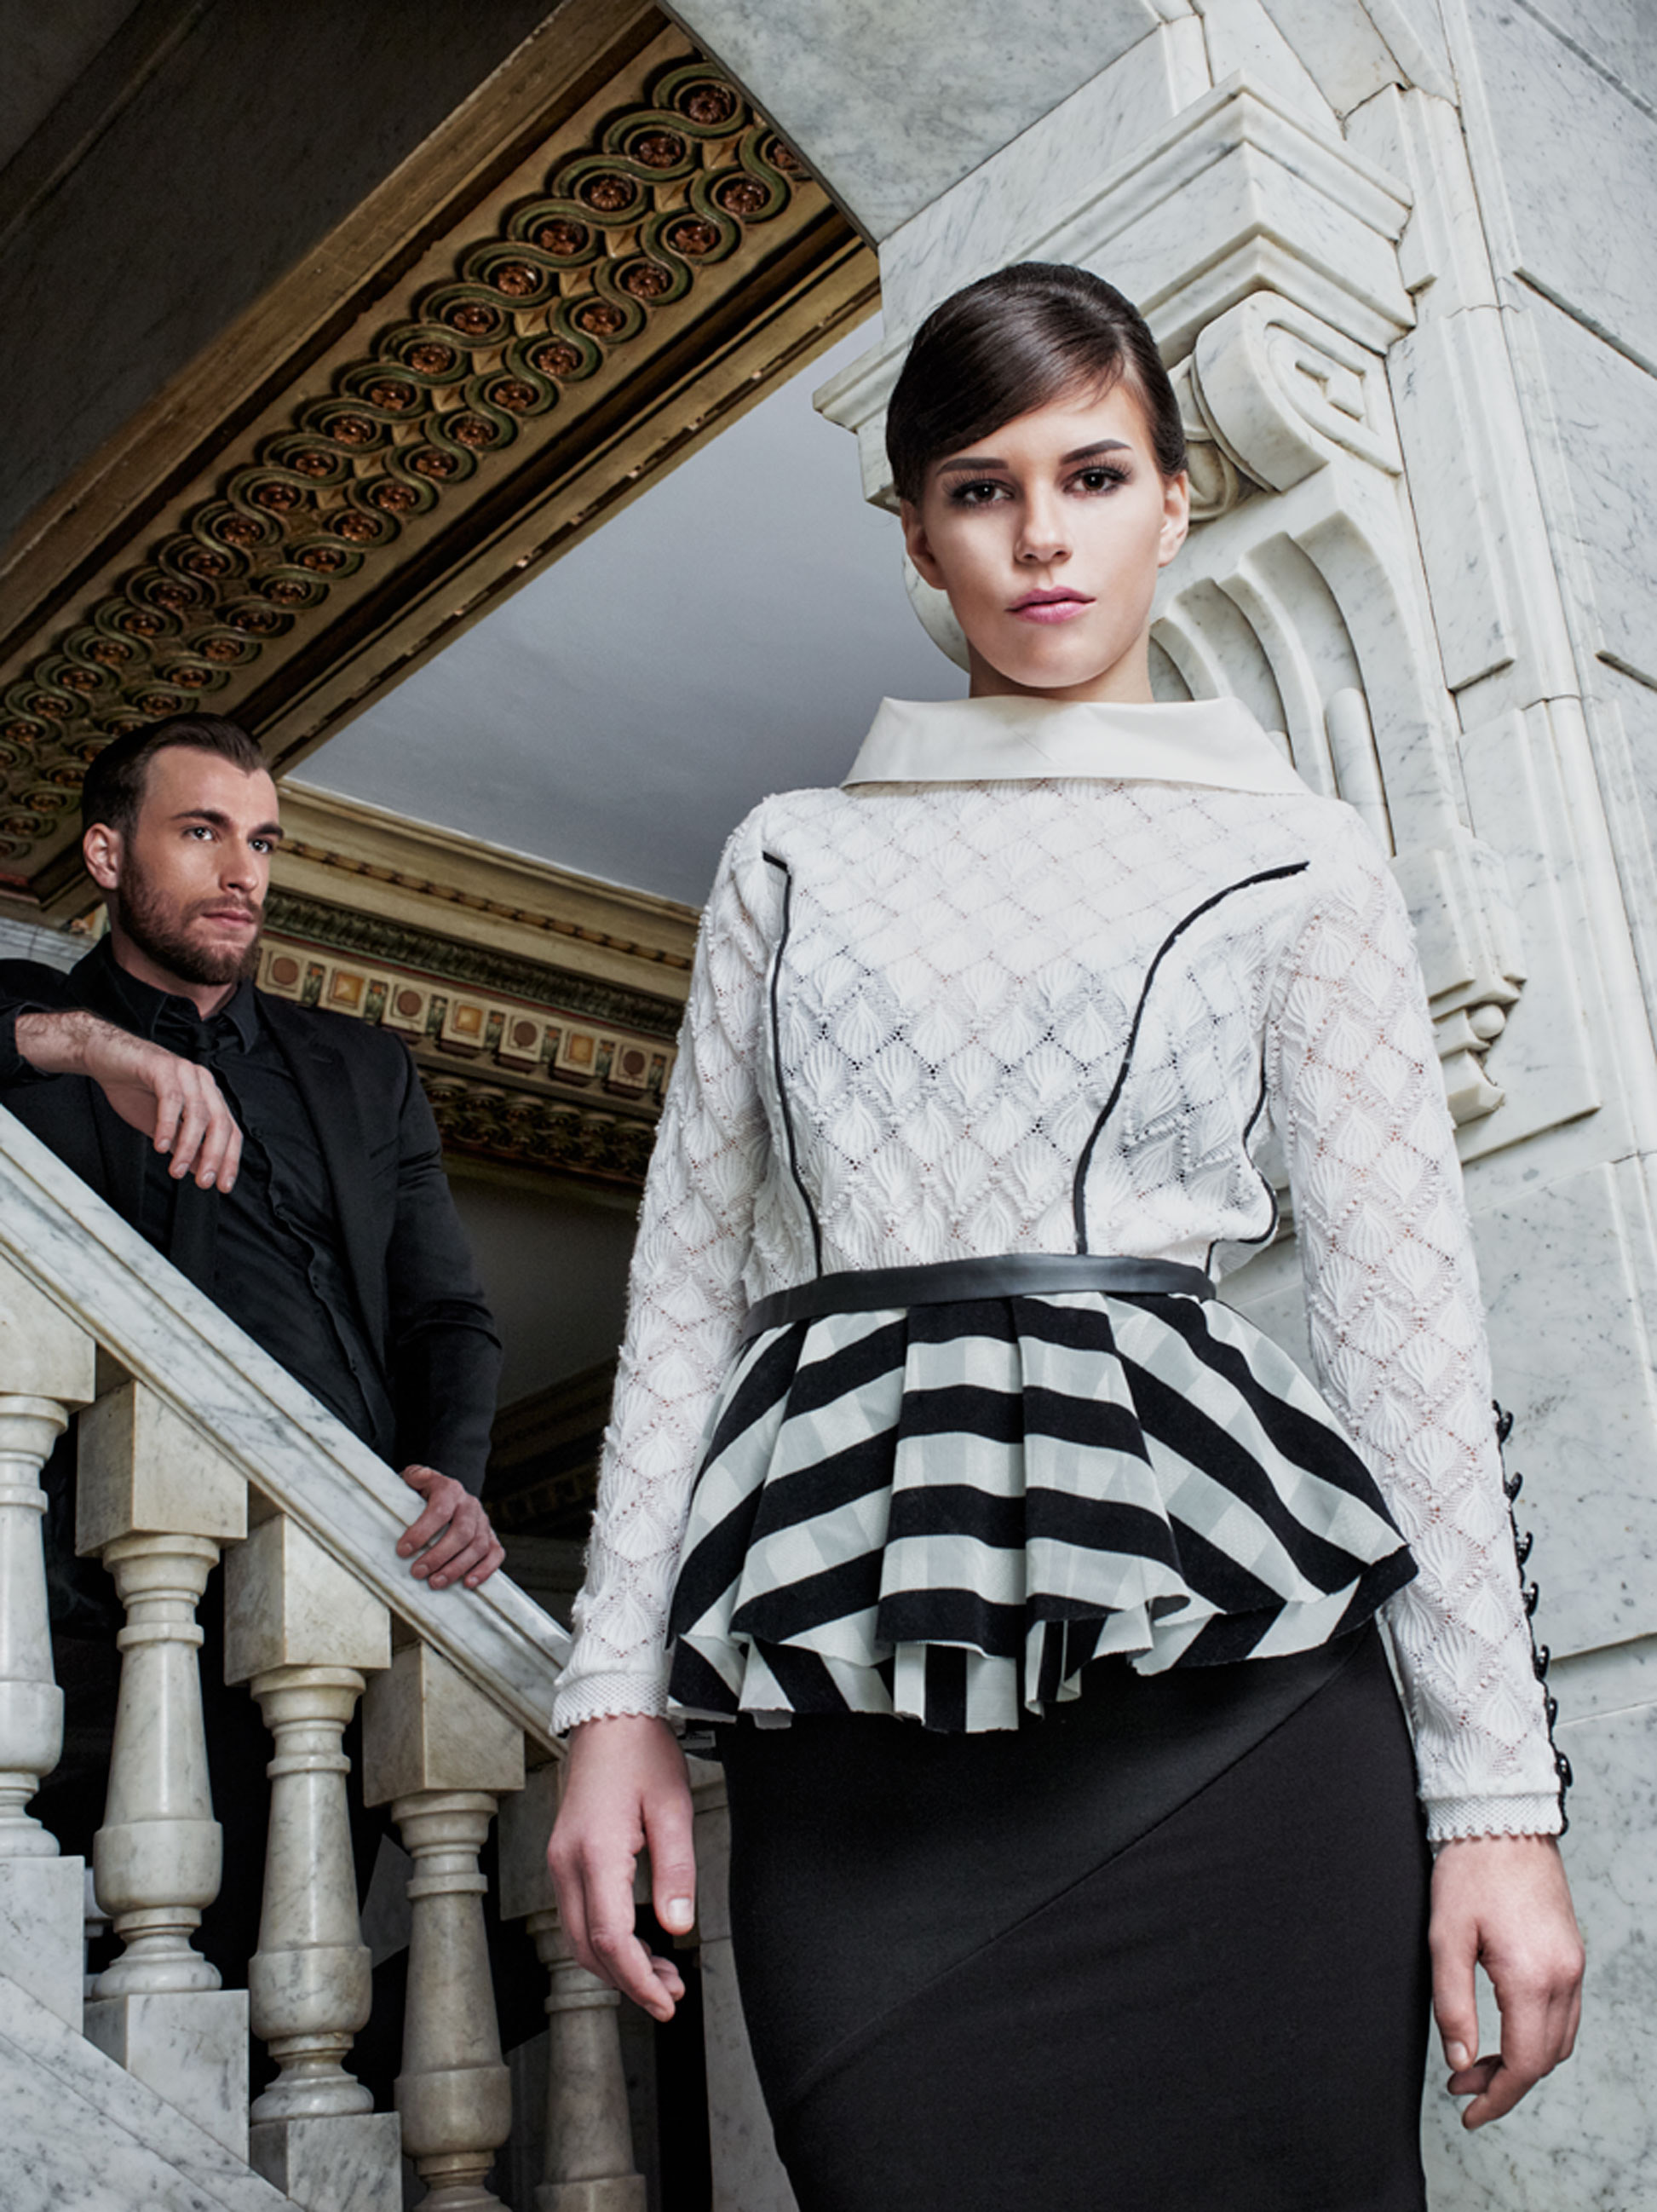 RULERS OF EVIL_7_Model Morgann Portrays An Evil System Dressed In White & Black Top With Black Skirt Staring Down At Viewer In Front Of Marble Stairway With Model Jon Portraying An Evil Henchman Perched Above On Stairs Surveying Hall In Background In Columbus Ohio 